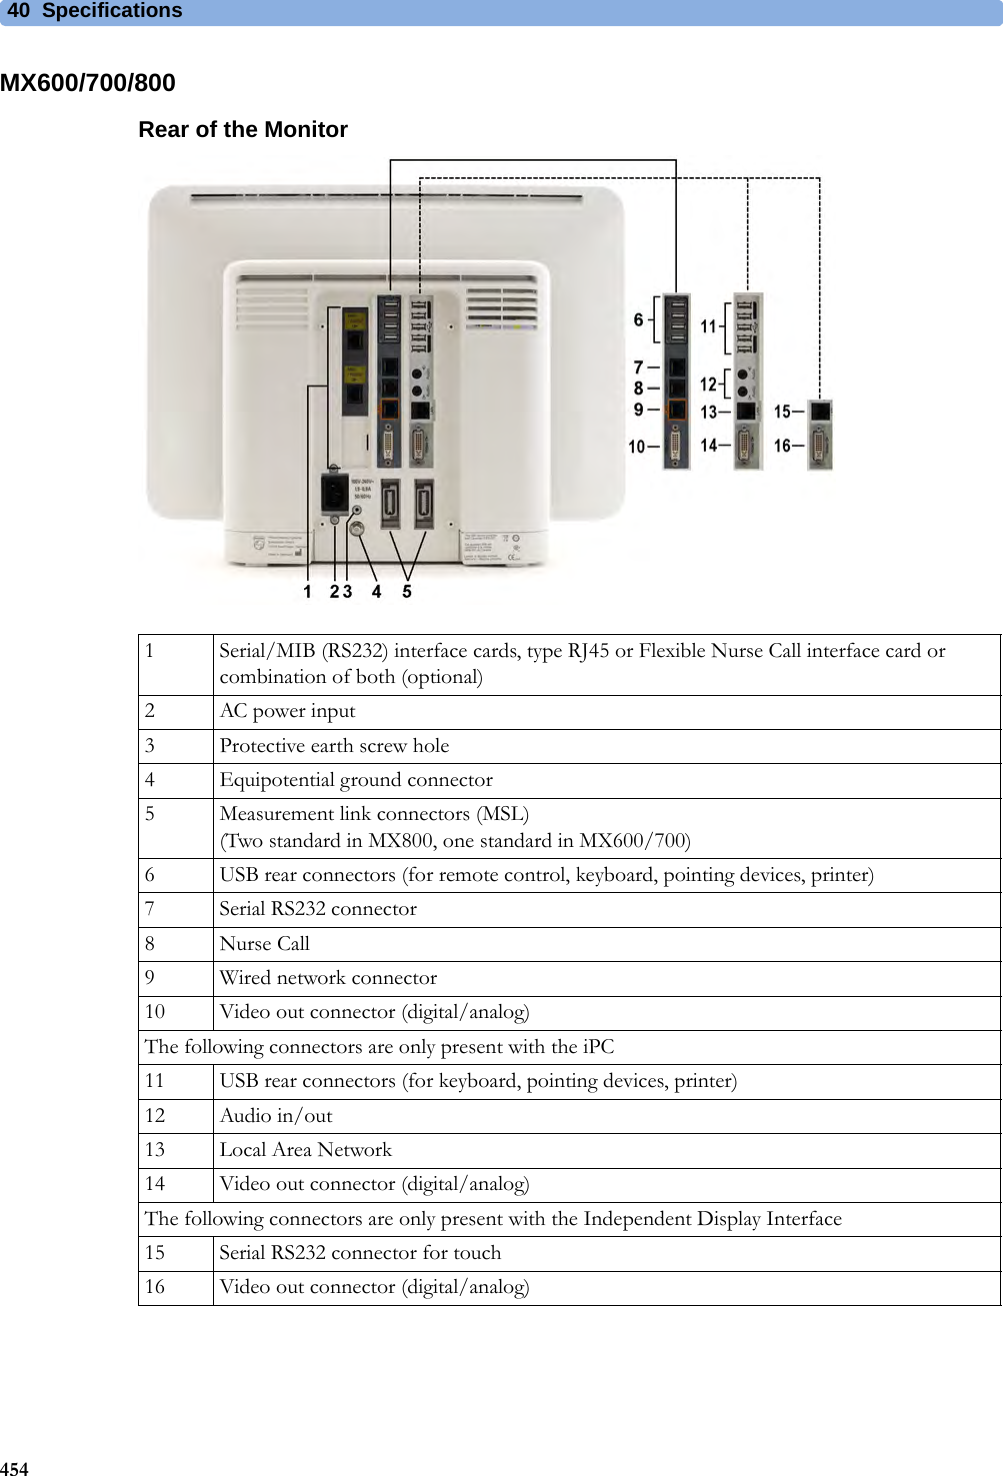 40 Specifications454MX600/700/800Rear of the Monitor1 Serial/MIB (RS232) interface cards, type RJ45 or Flexible Nurse Call interface card or combination of both (optional)2 AC power input3 Protective earth screw hole4 Equipotential ground connector5 Measurement link connectors (MSL)(Two standard in MX800, one standard in MX600/700)6 USB rear connectors (for remote control, keyboard, pointing devices, printer)7 Serial RS232 connector8 Nurse Call 9 Wired network connector10 Video out connector (digital/analog)The following connectors are only present with the iPC11 USB rear connectors (for keyboard, pointing devices, printer)12 Audio in/out13 Local Area Network14 Video out connector (digital/analog)The following connectors are only present with the Independent Display Interface15 Serial RS232 connector for touch16 Video out connector (digital/analog)